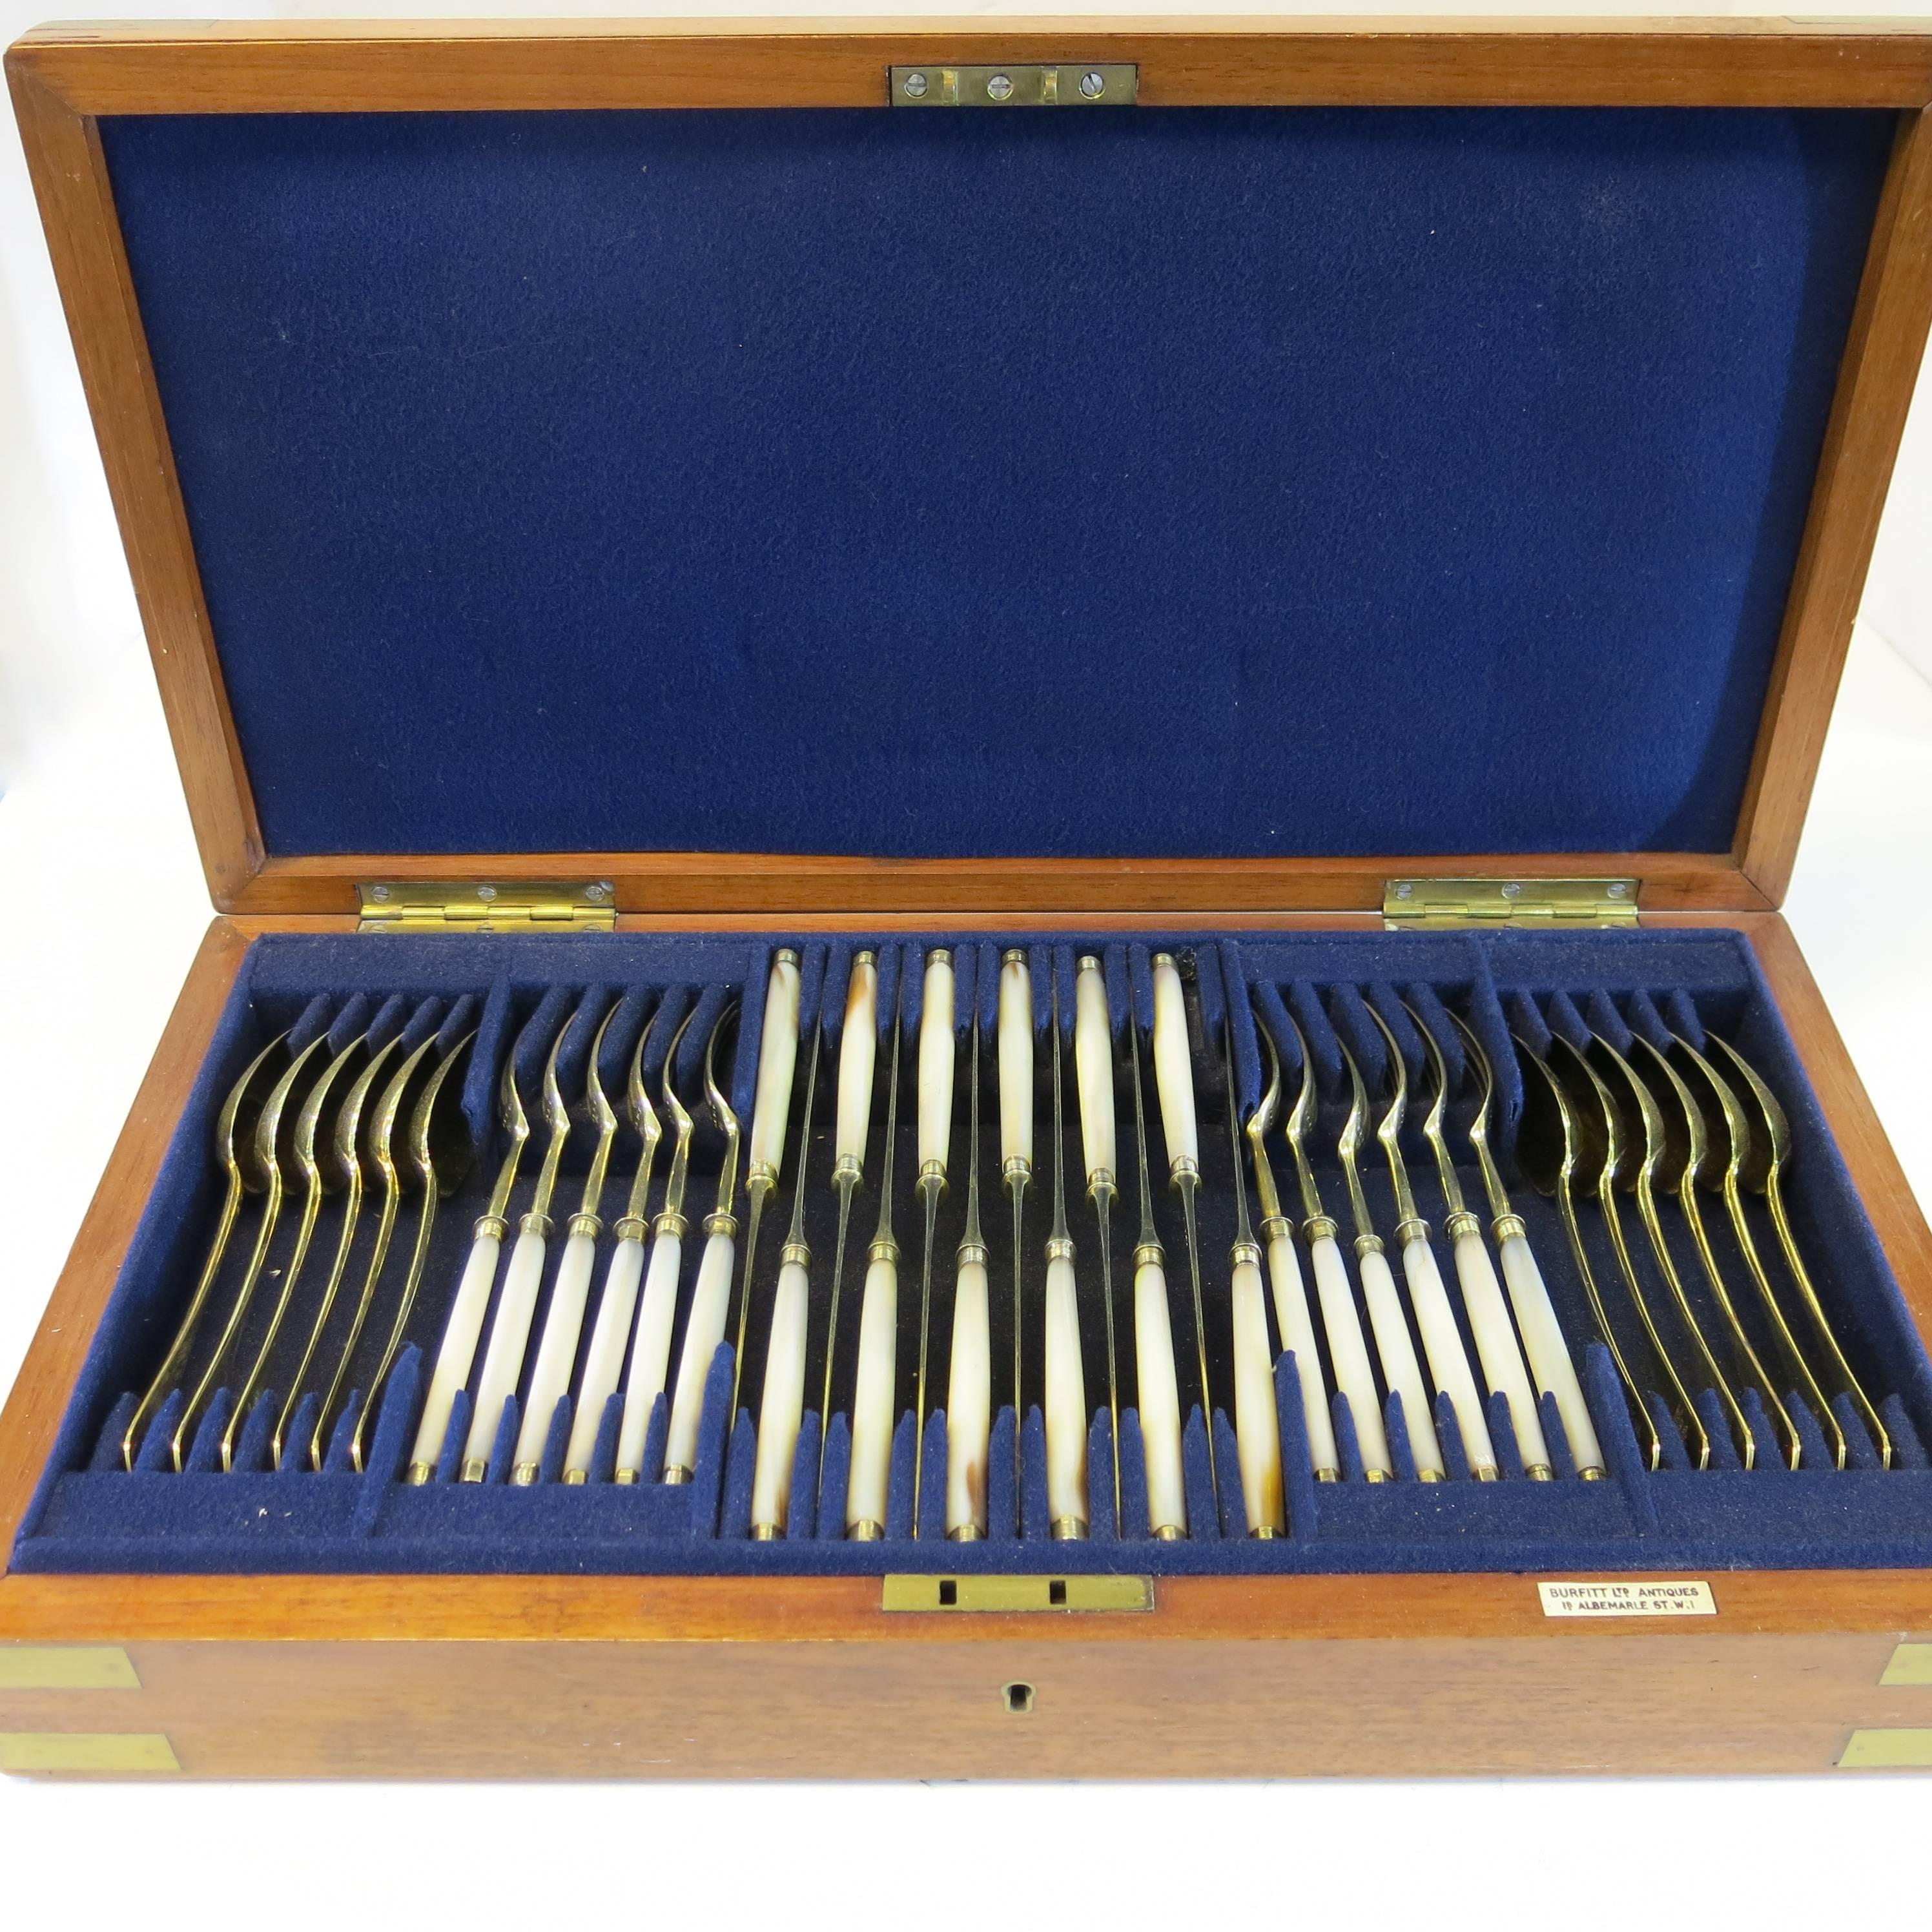 36 piece set, in fitted case. 12 knives & 12 forks with sterling silver vermeil blades and pearl handles, the 12 spoons are all sterling with vermeil. The spoons with hand engraved crest.
The knives hallmarked Matthew Boulton dated 1812, 8